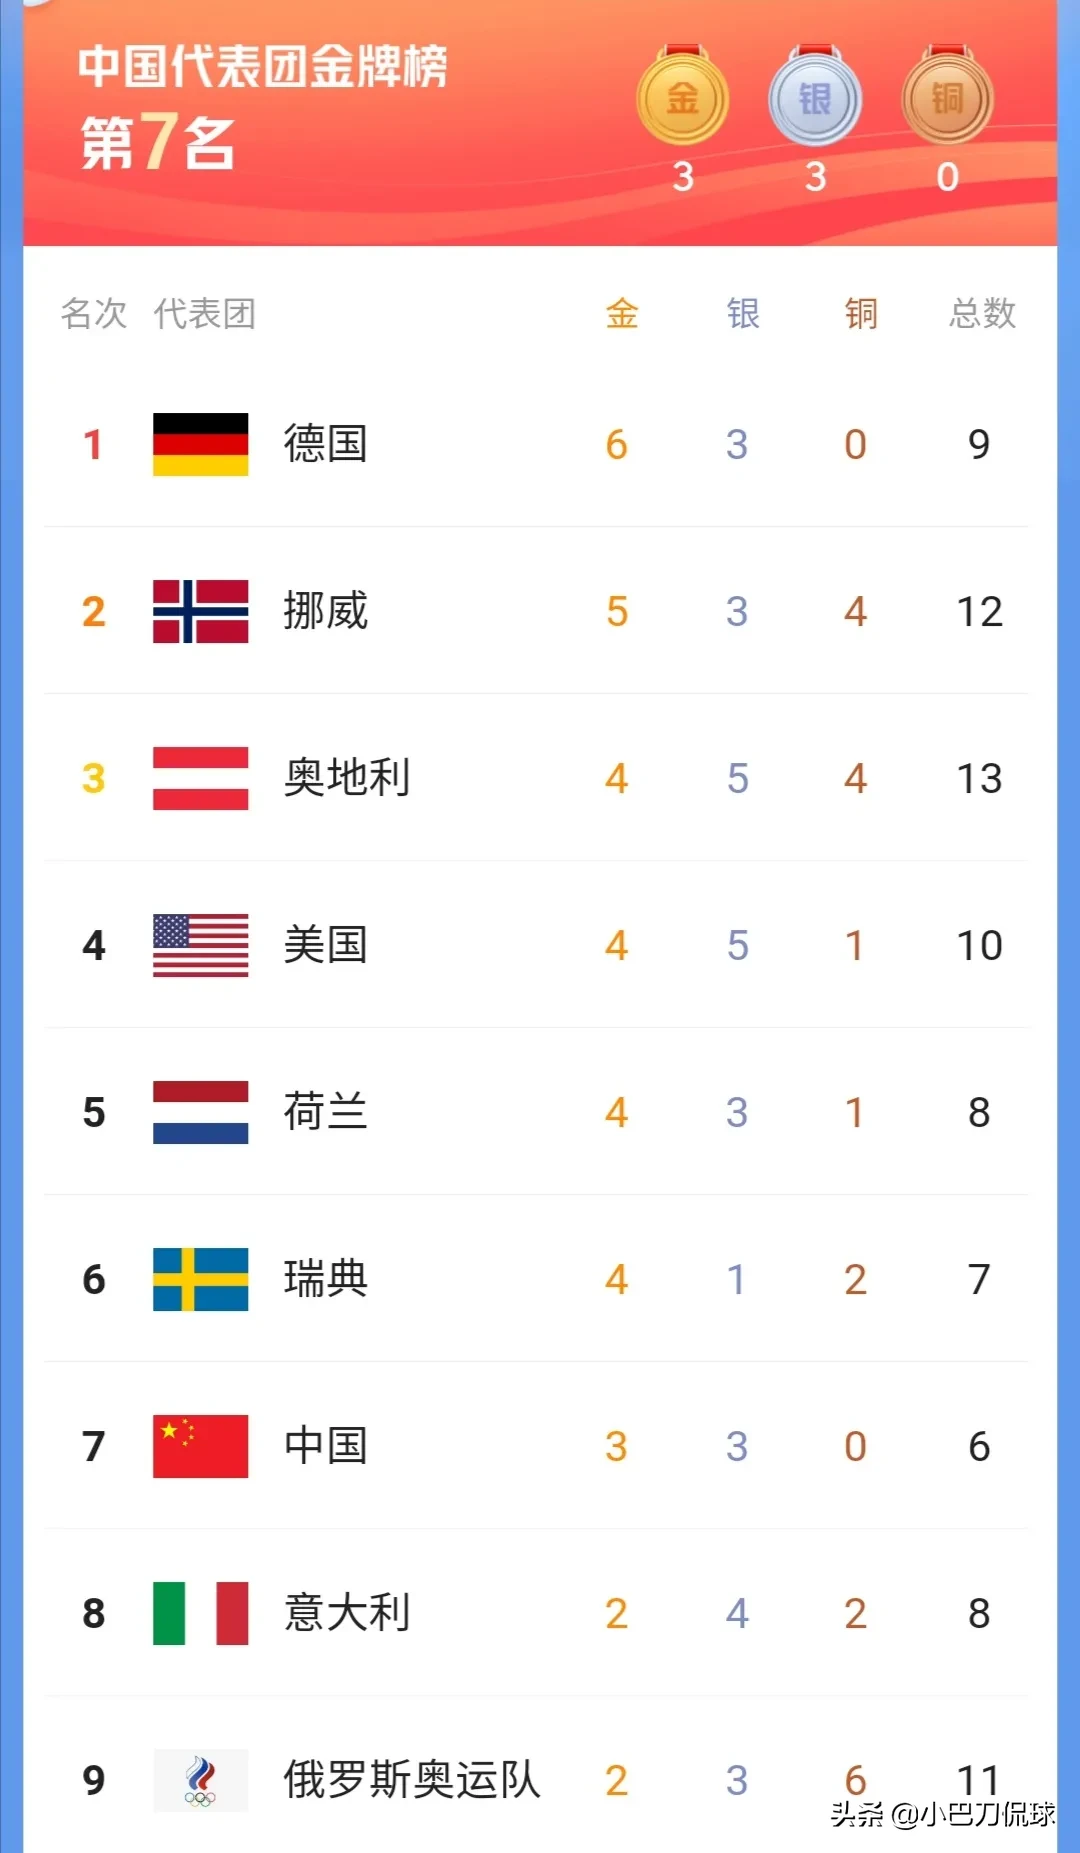 Winter olympics medal table